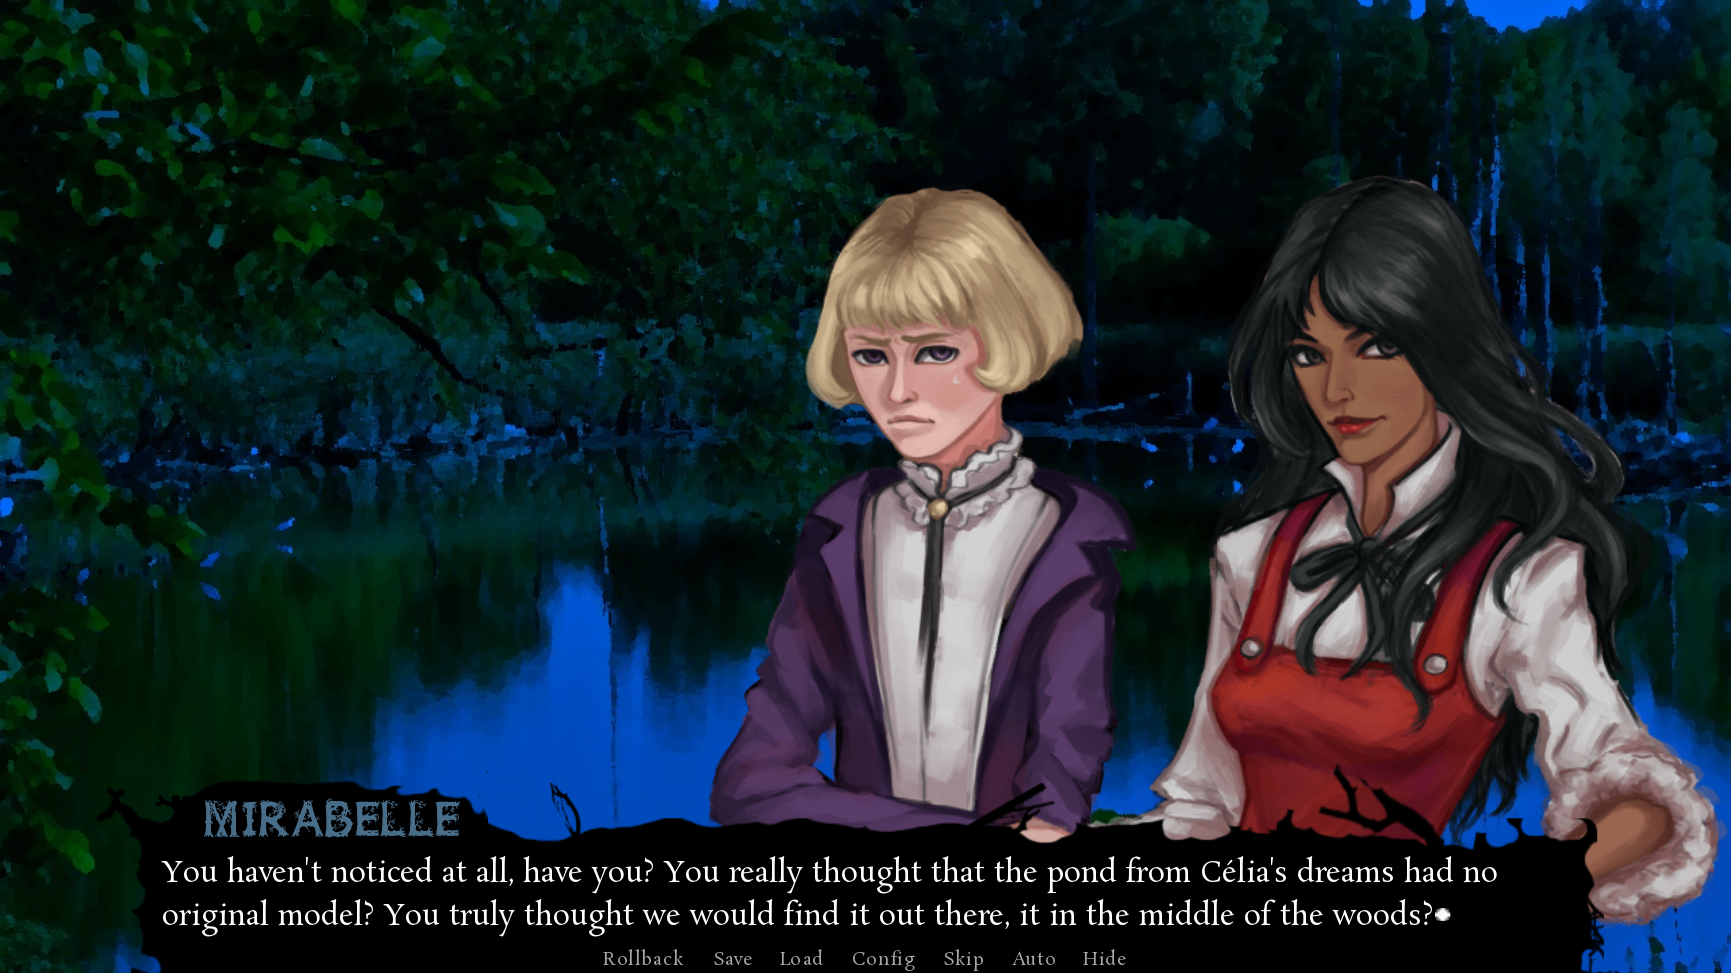 Screenshot of Sylvan Disappearance featuring Mirabelle, a black woman wearing a red dress, standing and smiling on the right, close to a younger blond boy, with an uneasy face. The background is a pond at night. In the textbox at the bottom of the screen, Mirabelle says: "You haven't noticed at all have you? You really thought that the pond from Célia's dreams had no original model? You truly thought we would find it out there, in the middle of the woods?"